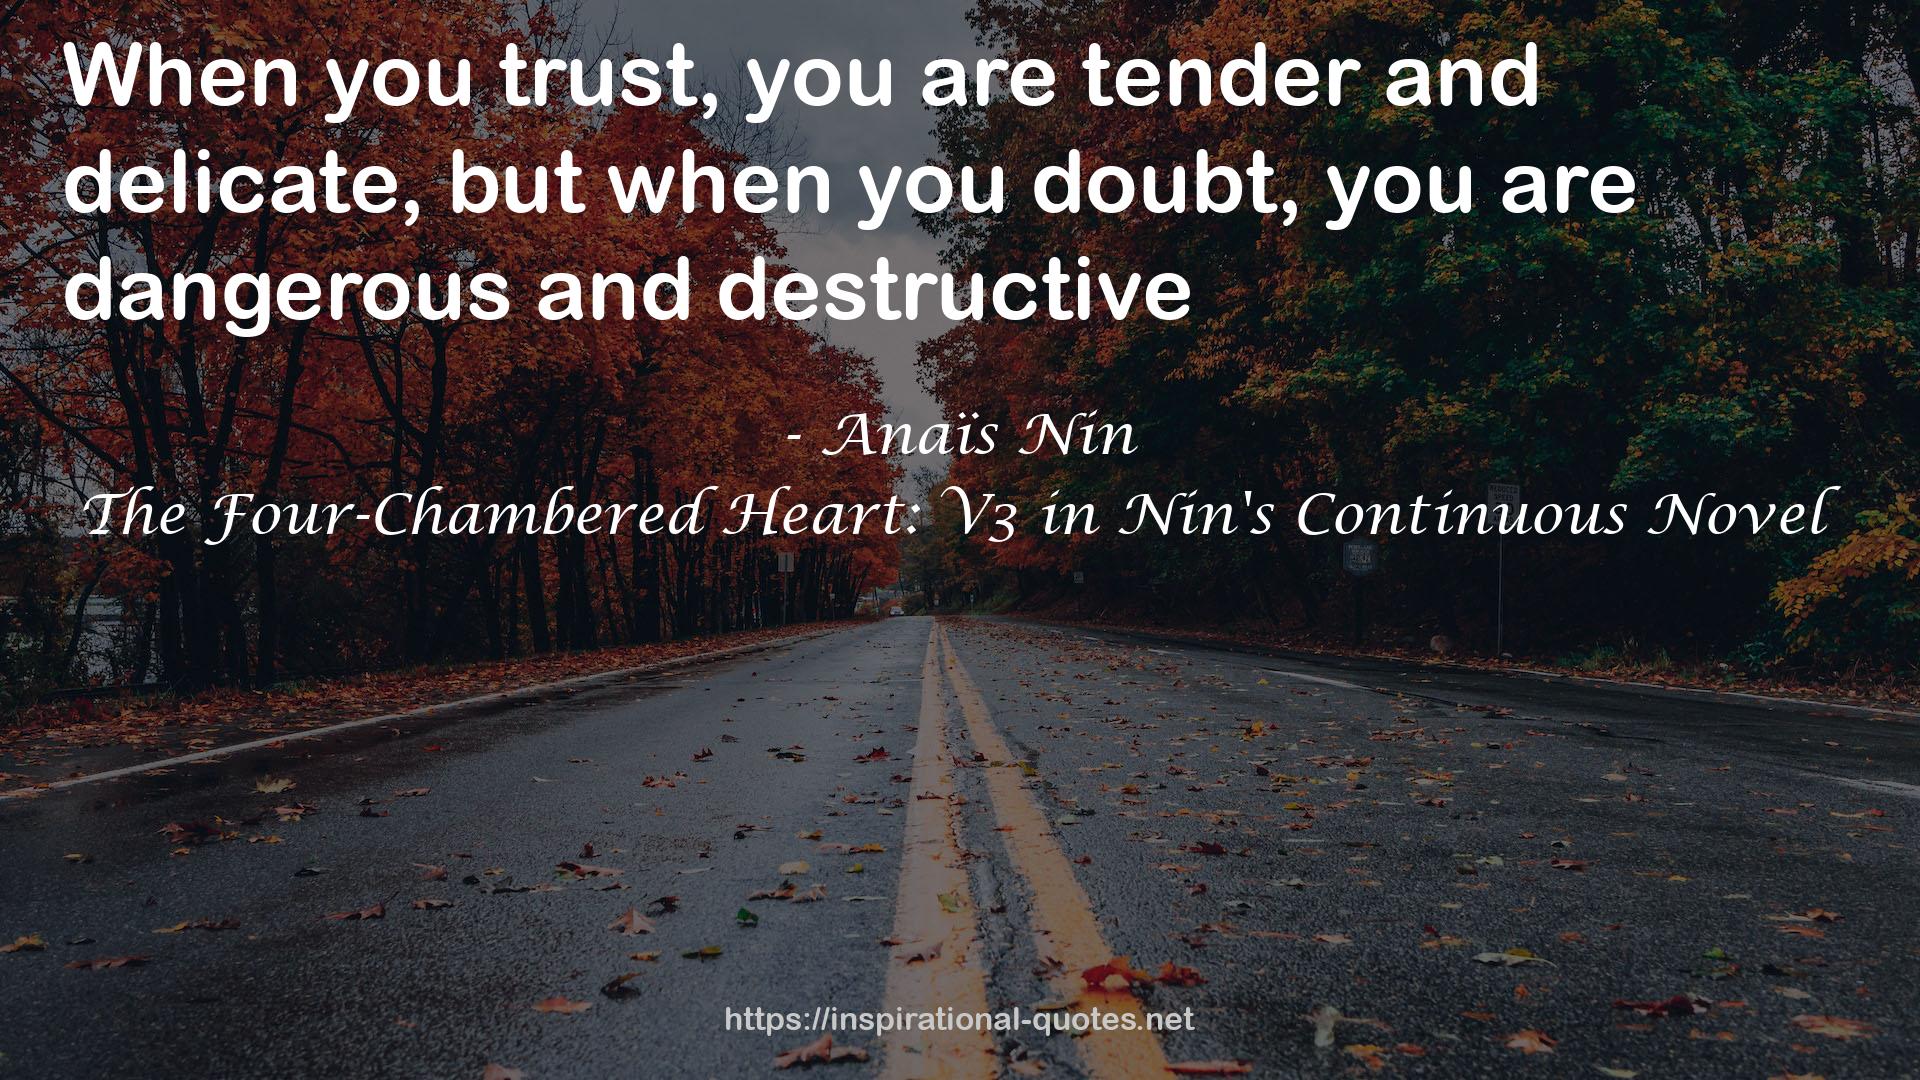 Anaïs Nin quote : When you trust, you are tender and delicate, but when you doubt, you are dangerous and destructive